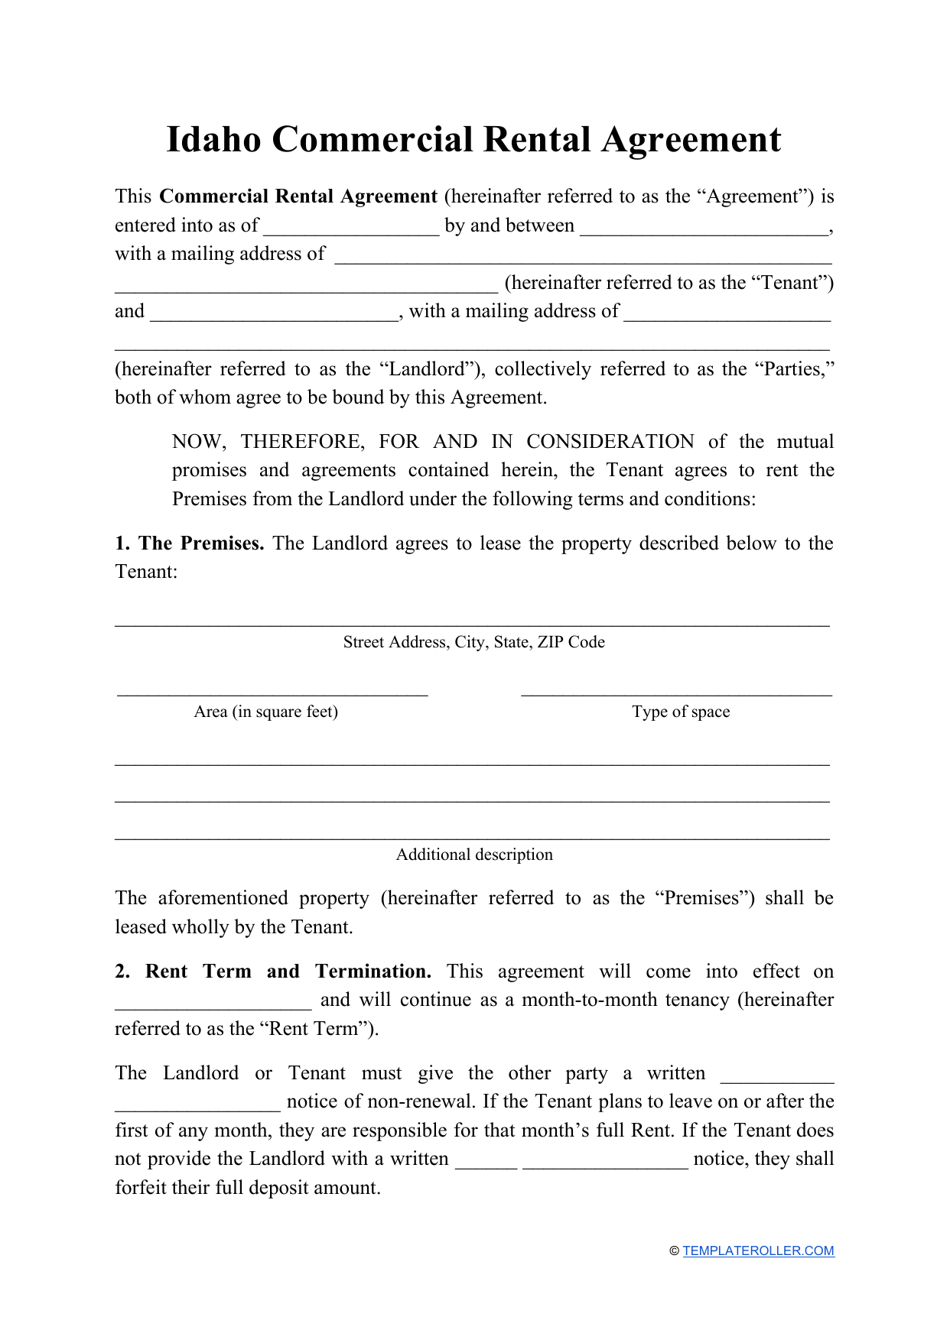 Commercial Rental Agreement Template - Idaho, Page 1